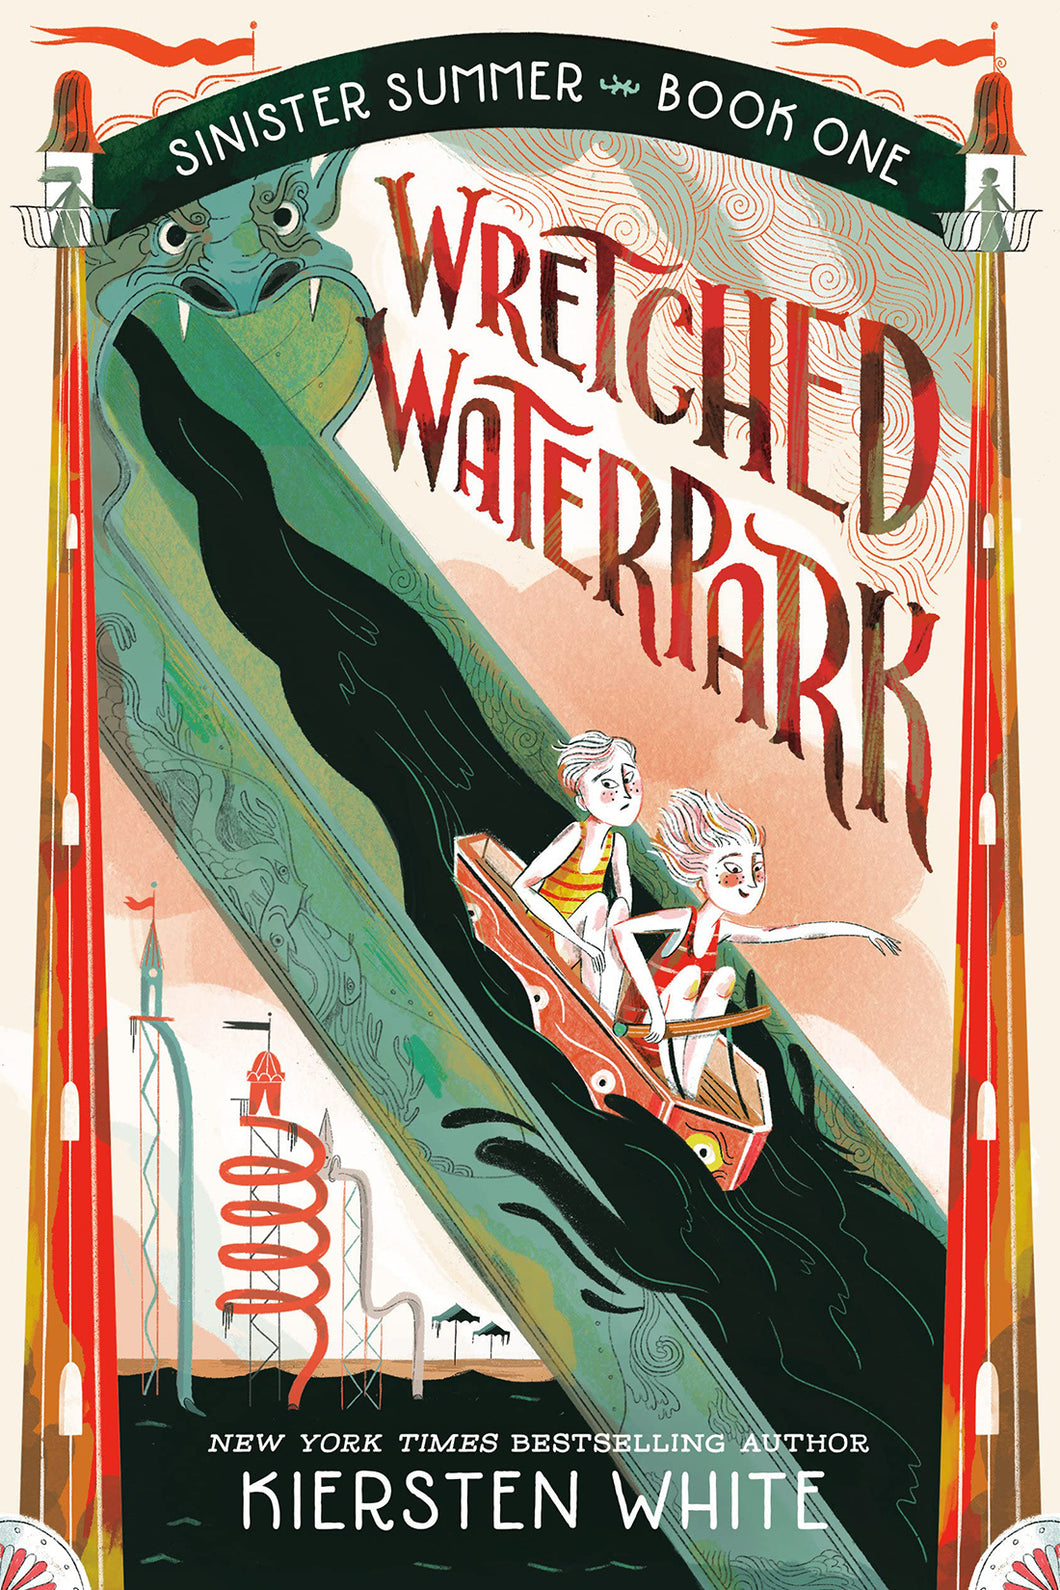 Wretched Waterpark (The Sinister Summer Series) by Kiersten White / Hardcover or Paperback - NEW BOOK